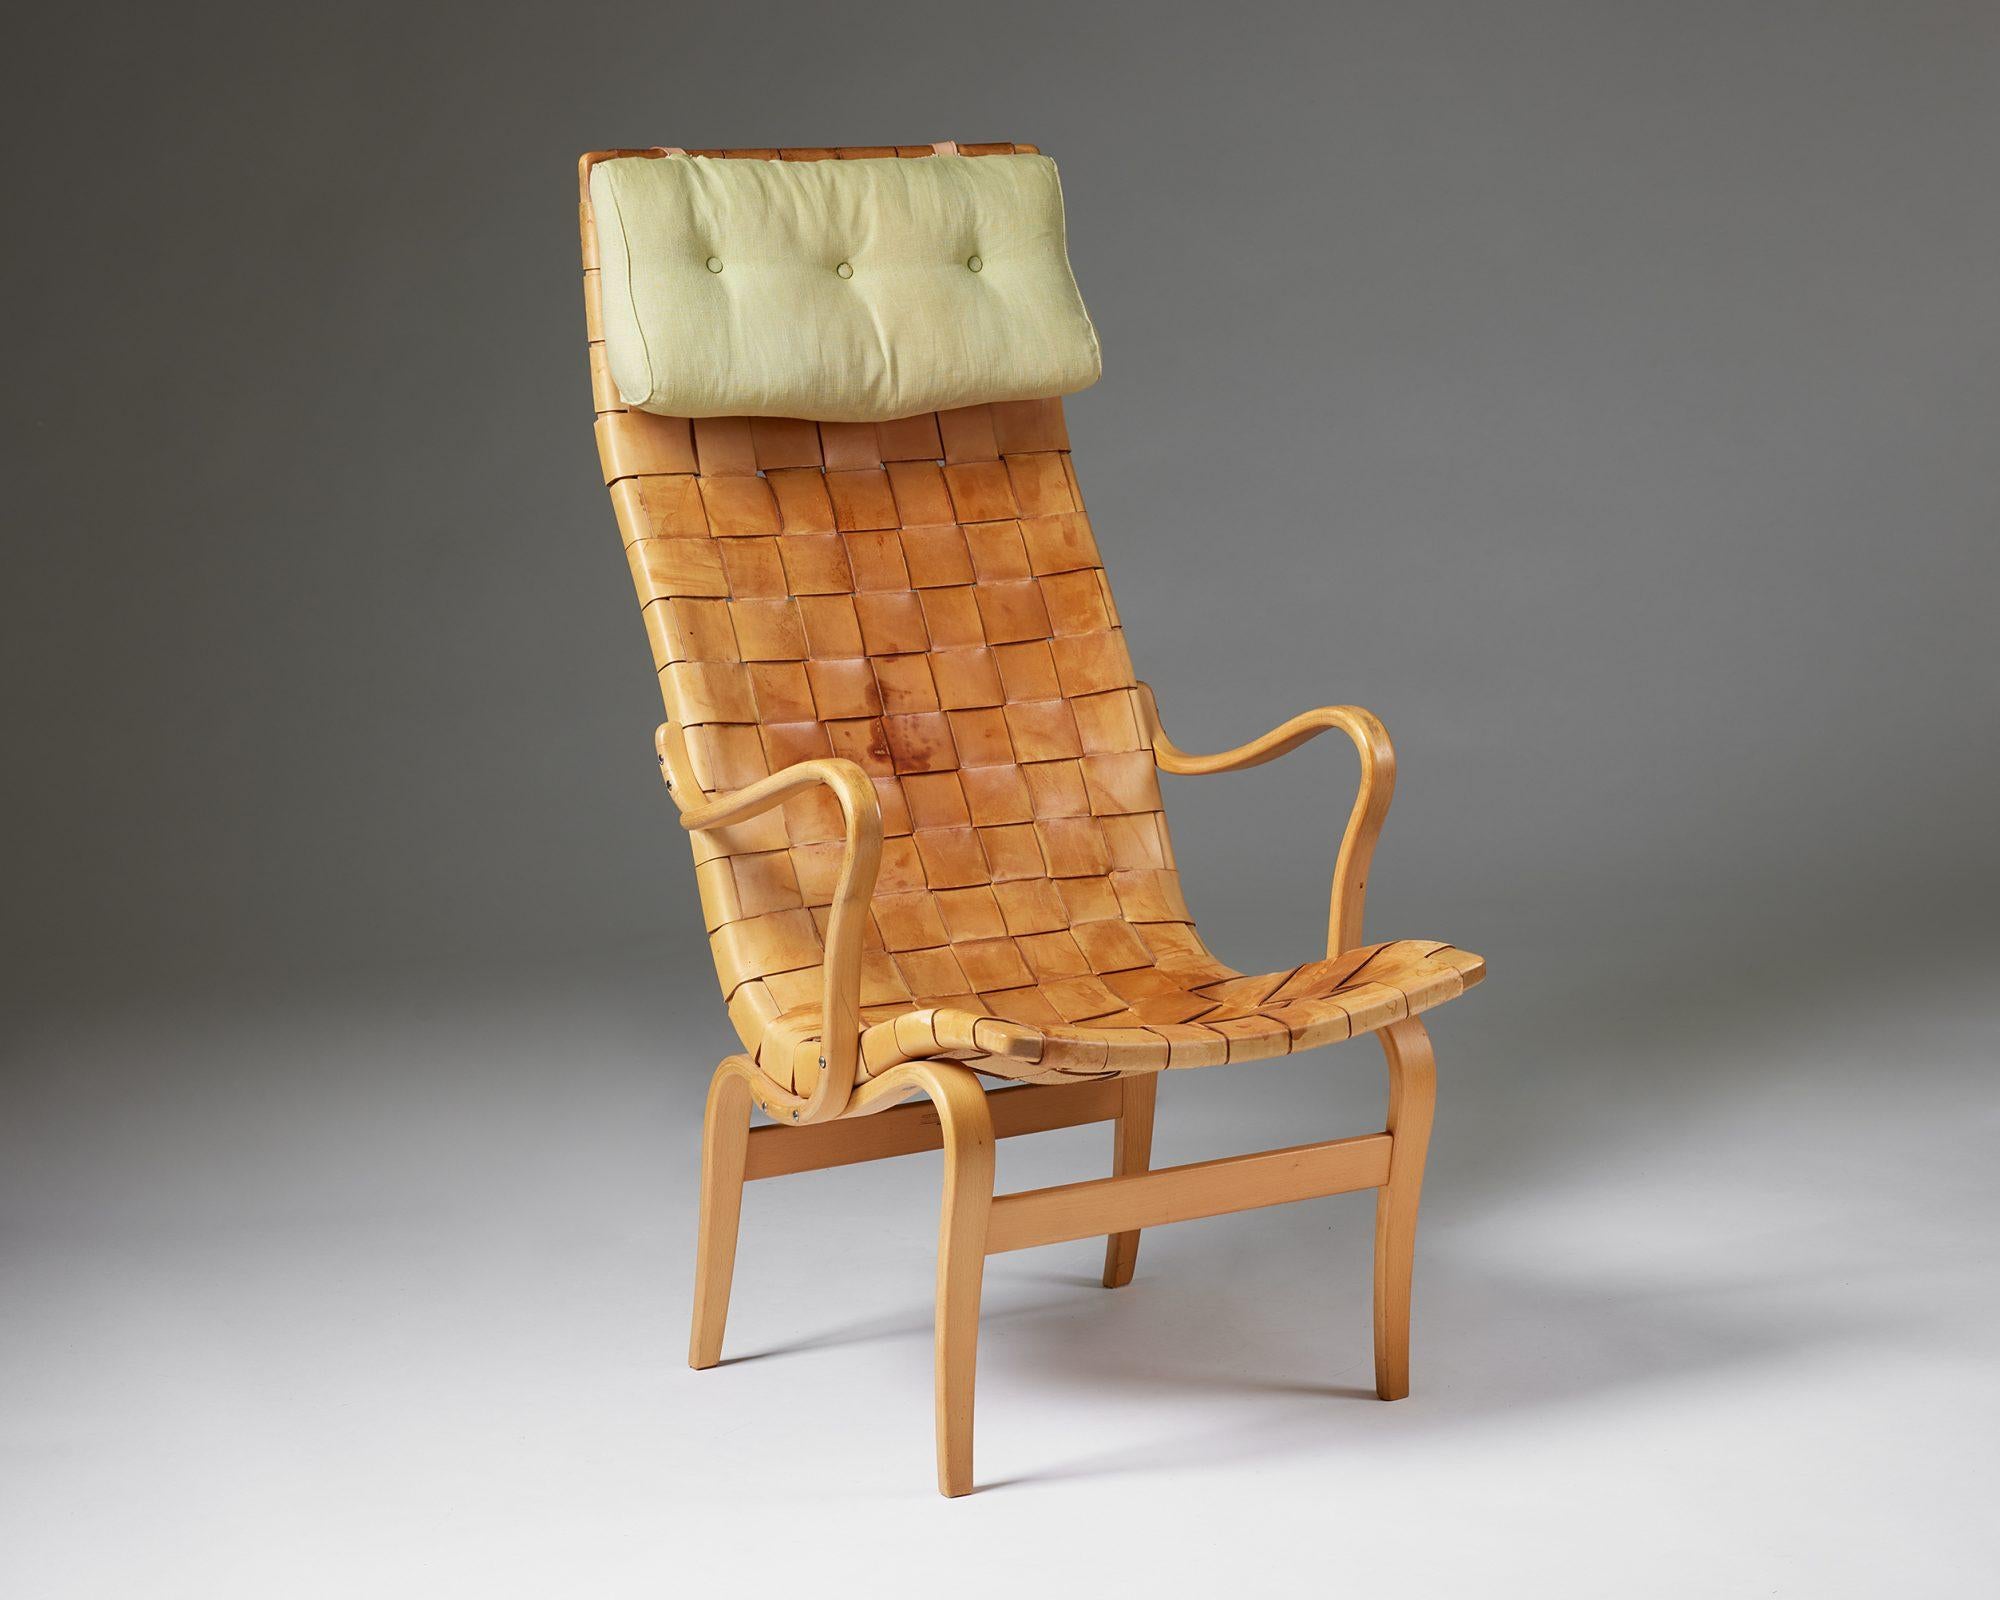 Armchair ‘Eva High’ designed by Bruno Mathsson for Karl Mathsson, 
Sweden, 1960.

Birch framing, braided leather upholstery and a textile neck pillow.

Stamped.

Measurements: 
H: 110 cm / 3' 7 1/4''
W: 60 cm / 23 1/2''
D: 73 cm / 2' 4 3/4''
SH: 35